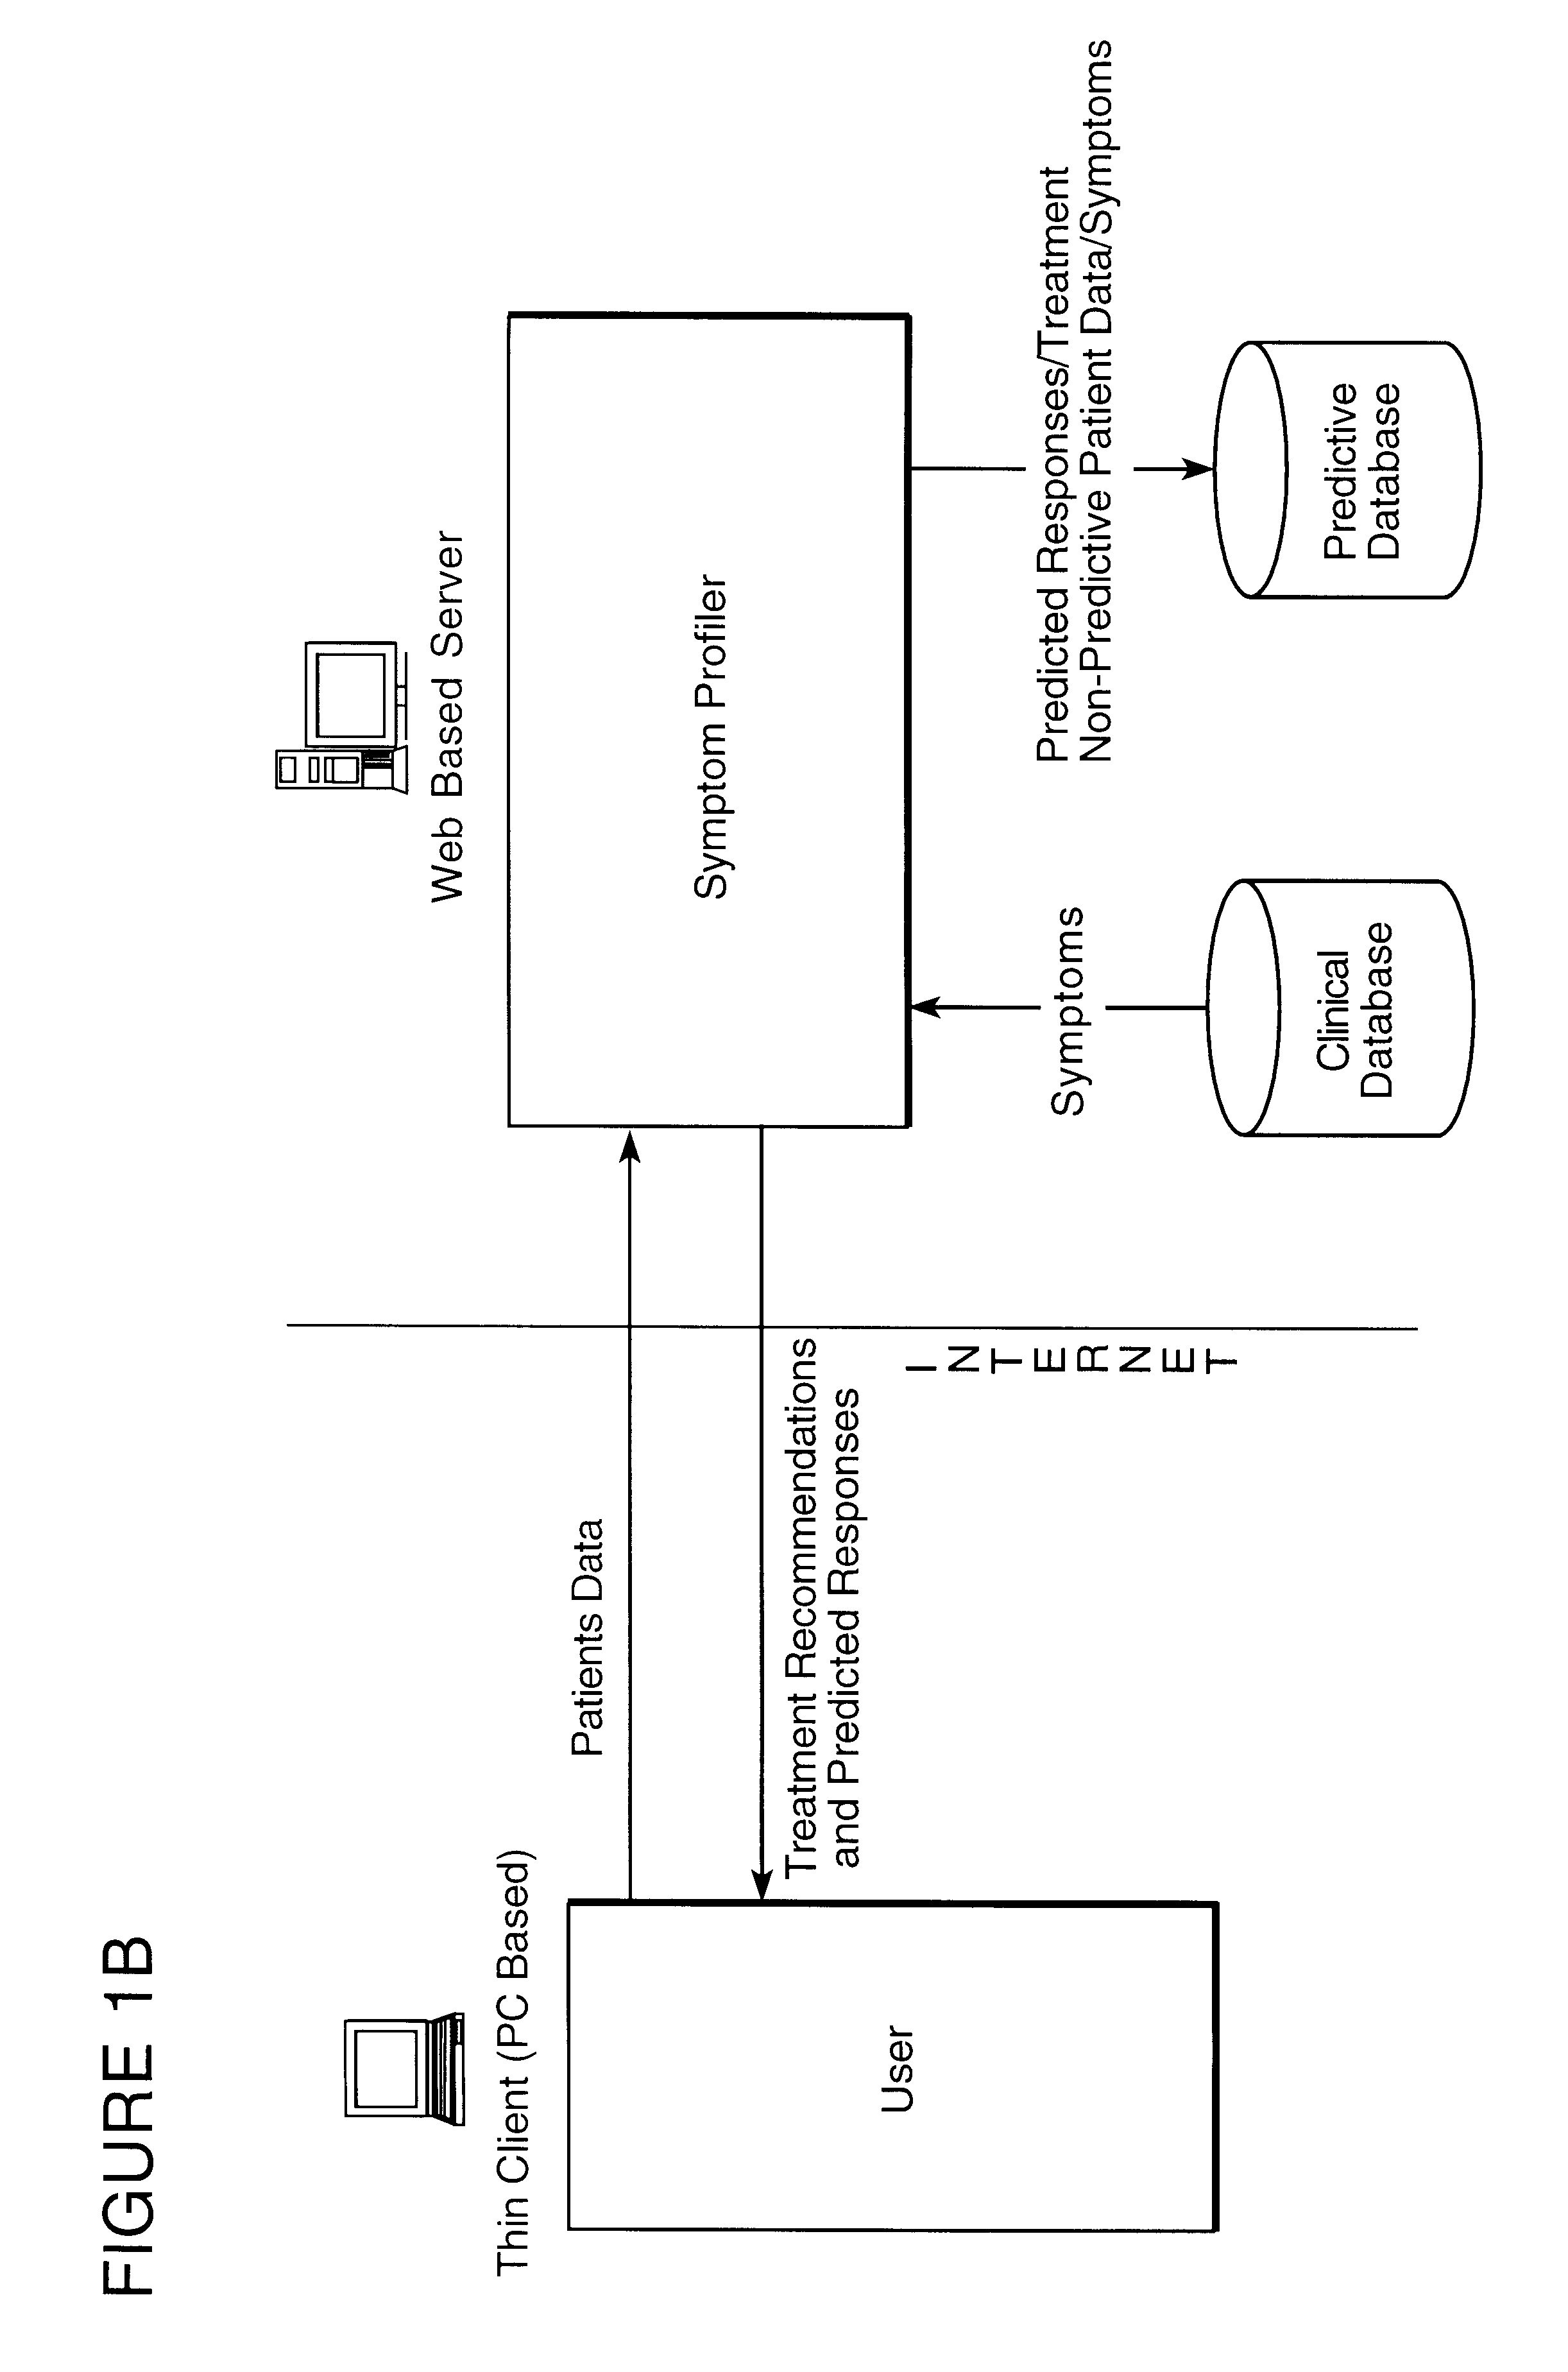 Method for predicting the therapeutic outcome of a treatment